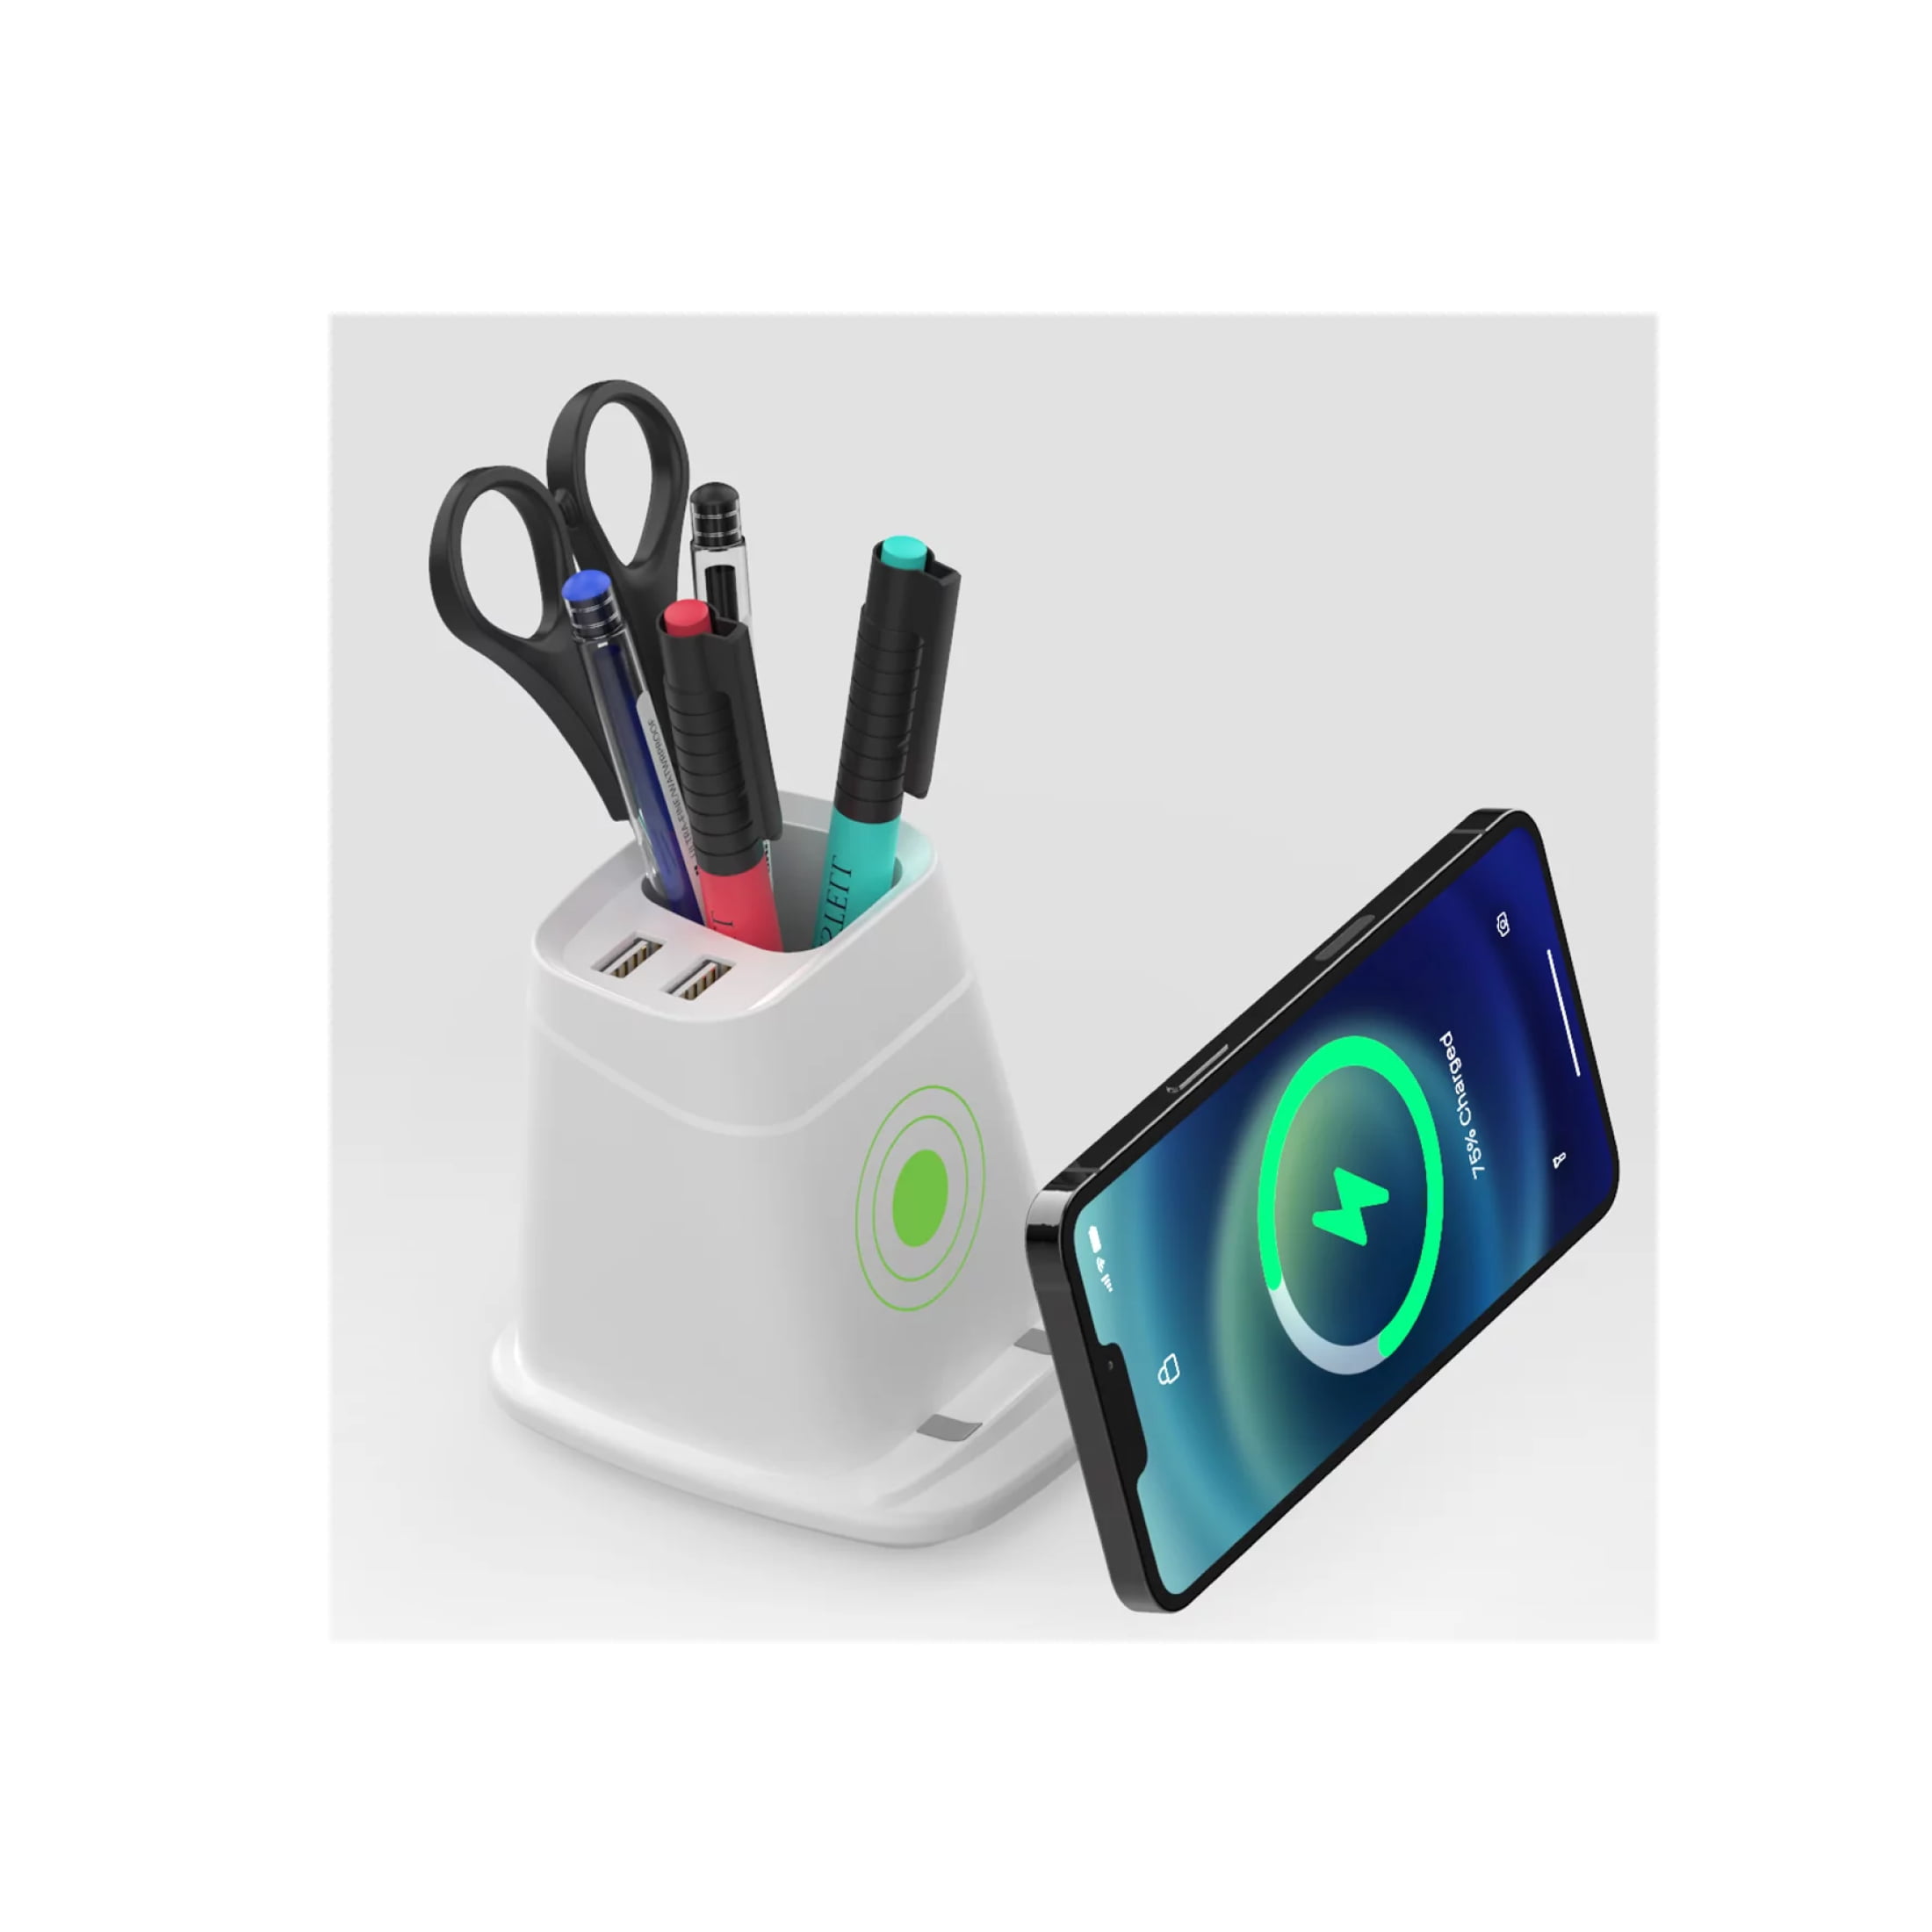 Premier Qi Phone Docking Charging Stand with Dual USB & Pencil Holder (for Phones like Apple or Android)